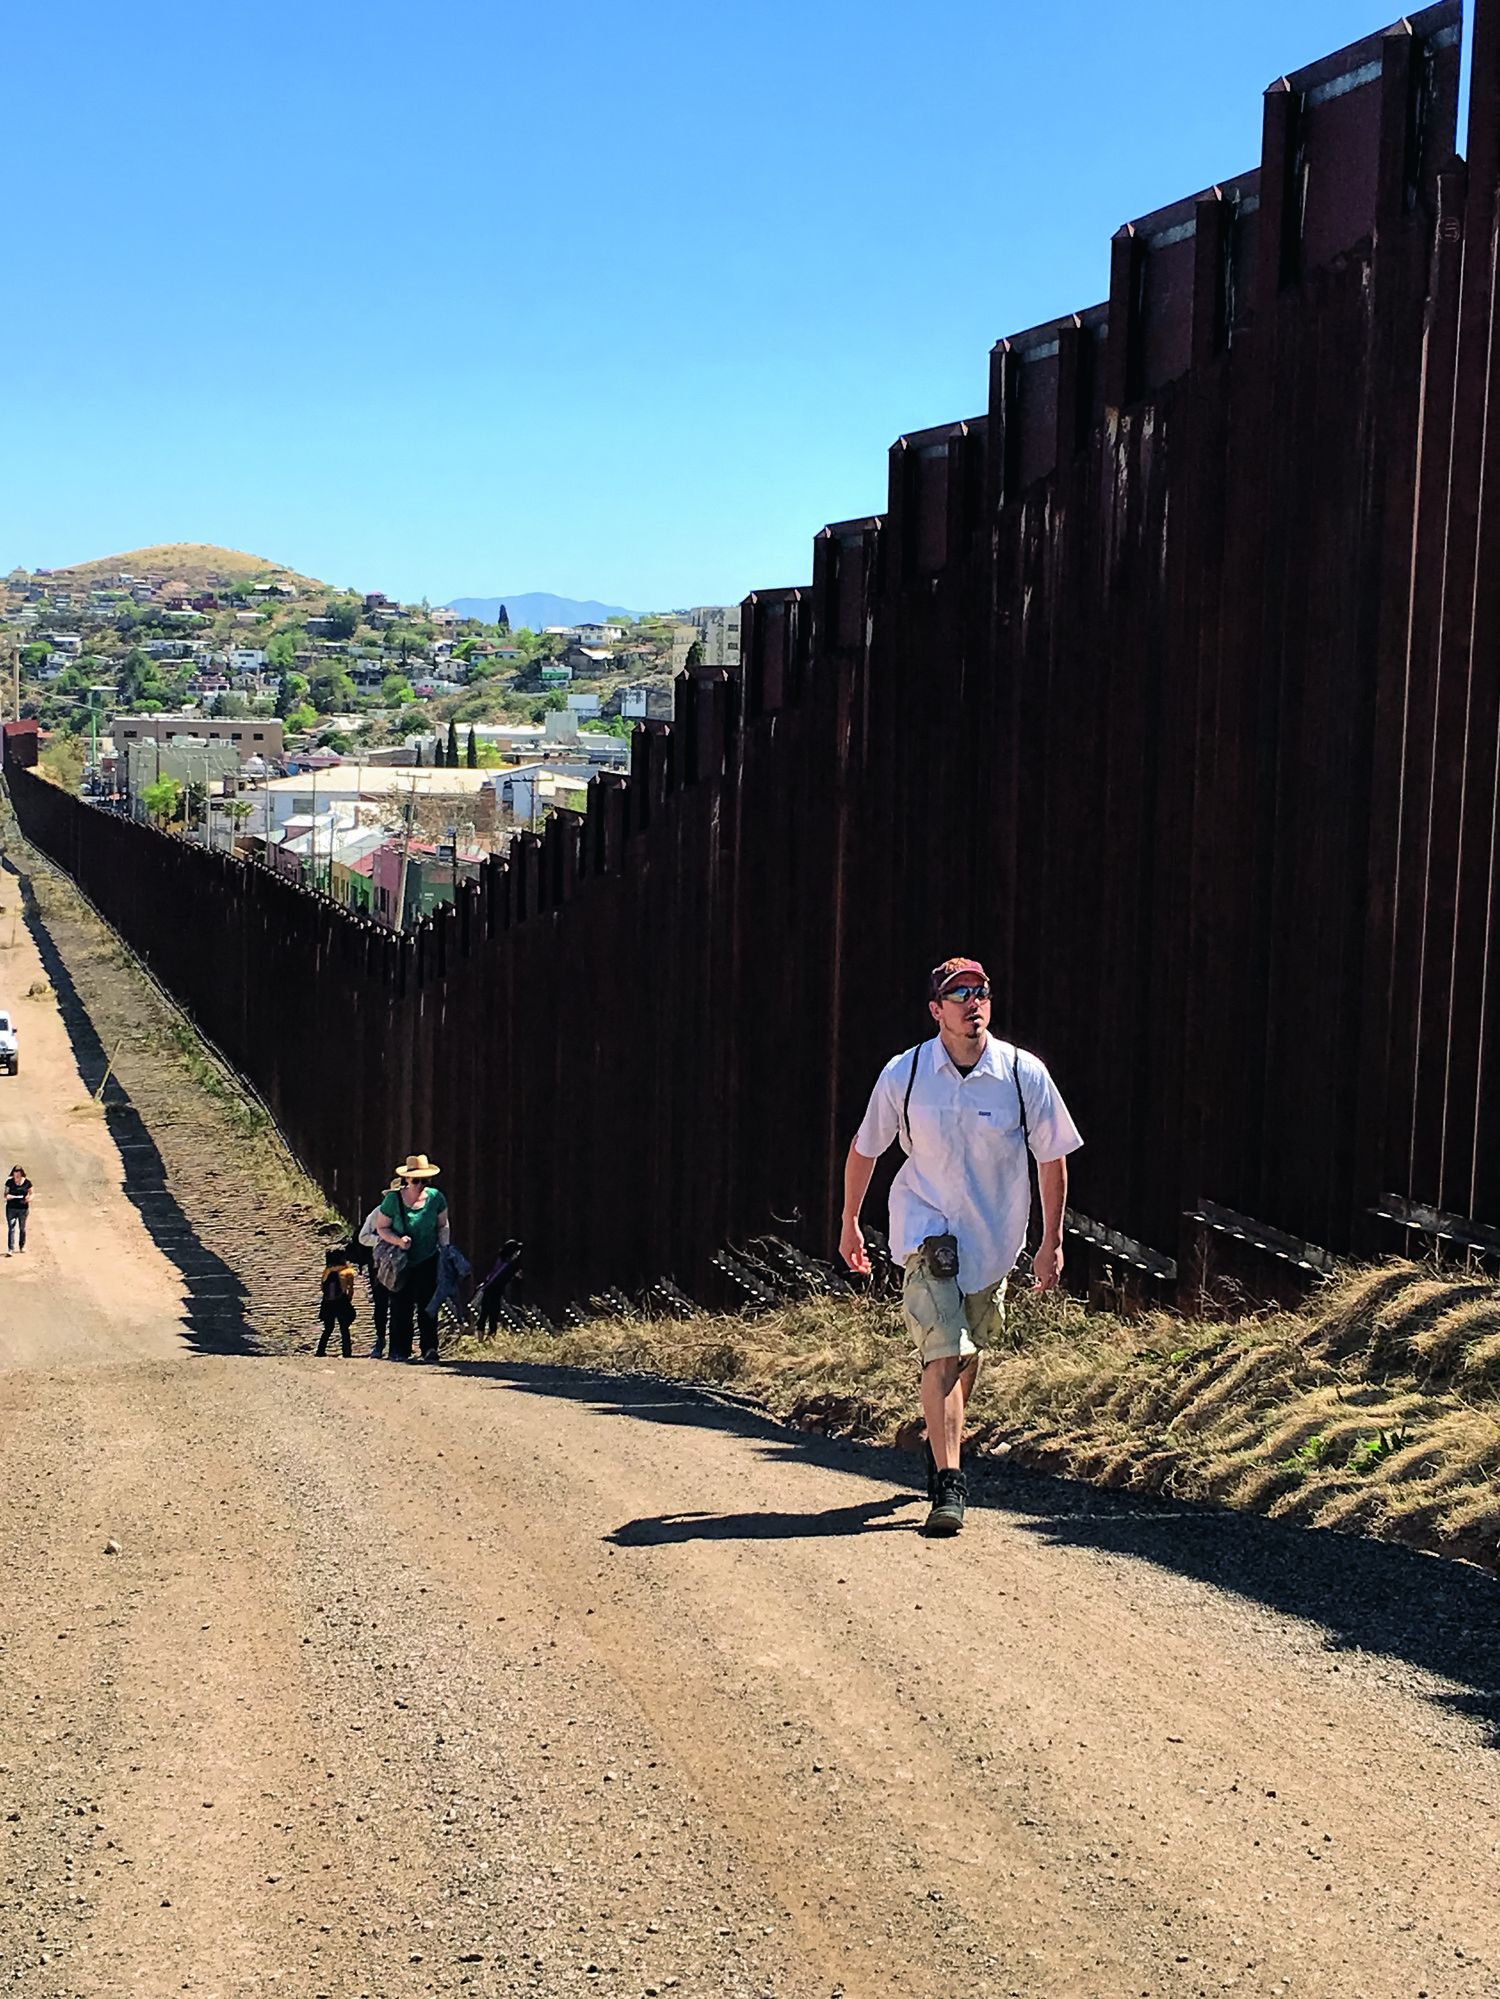 Tales from the border